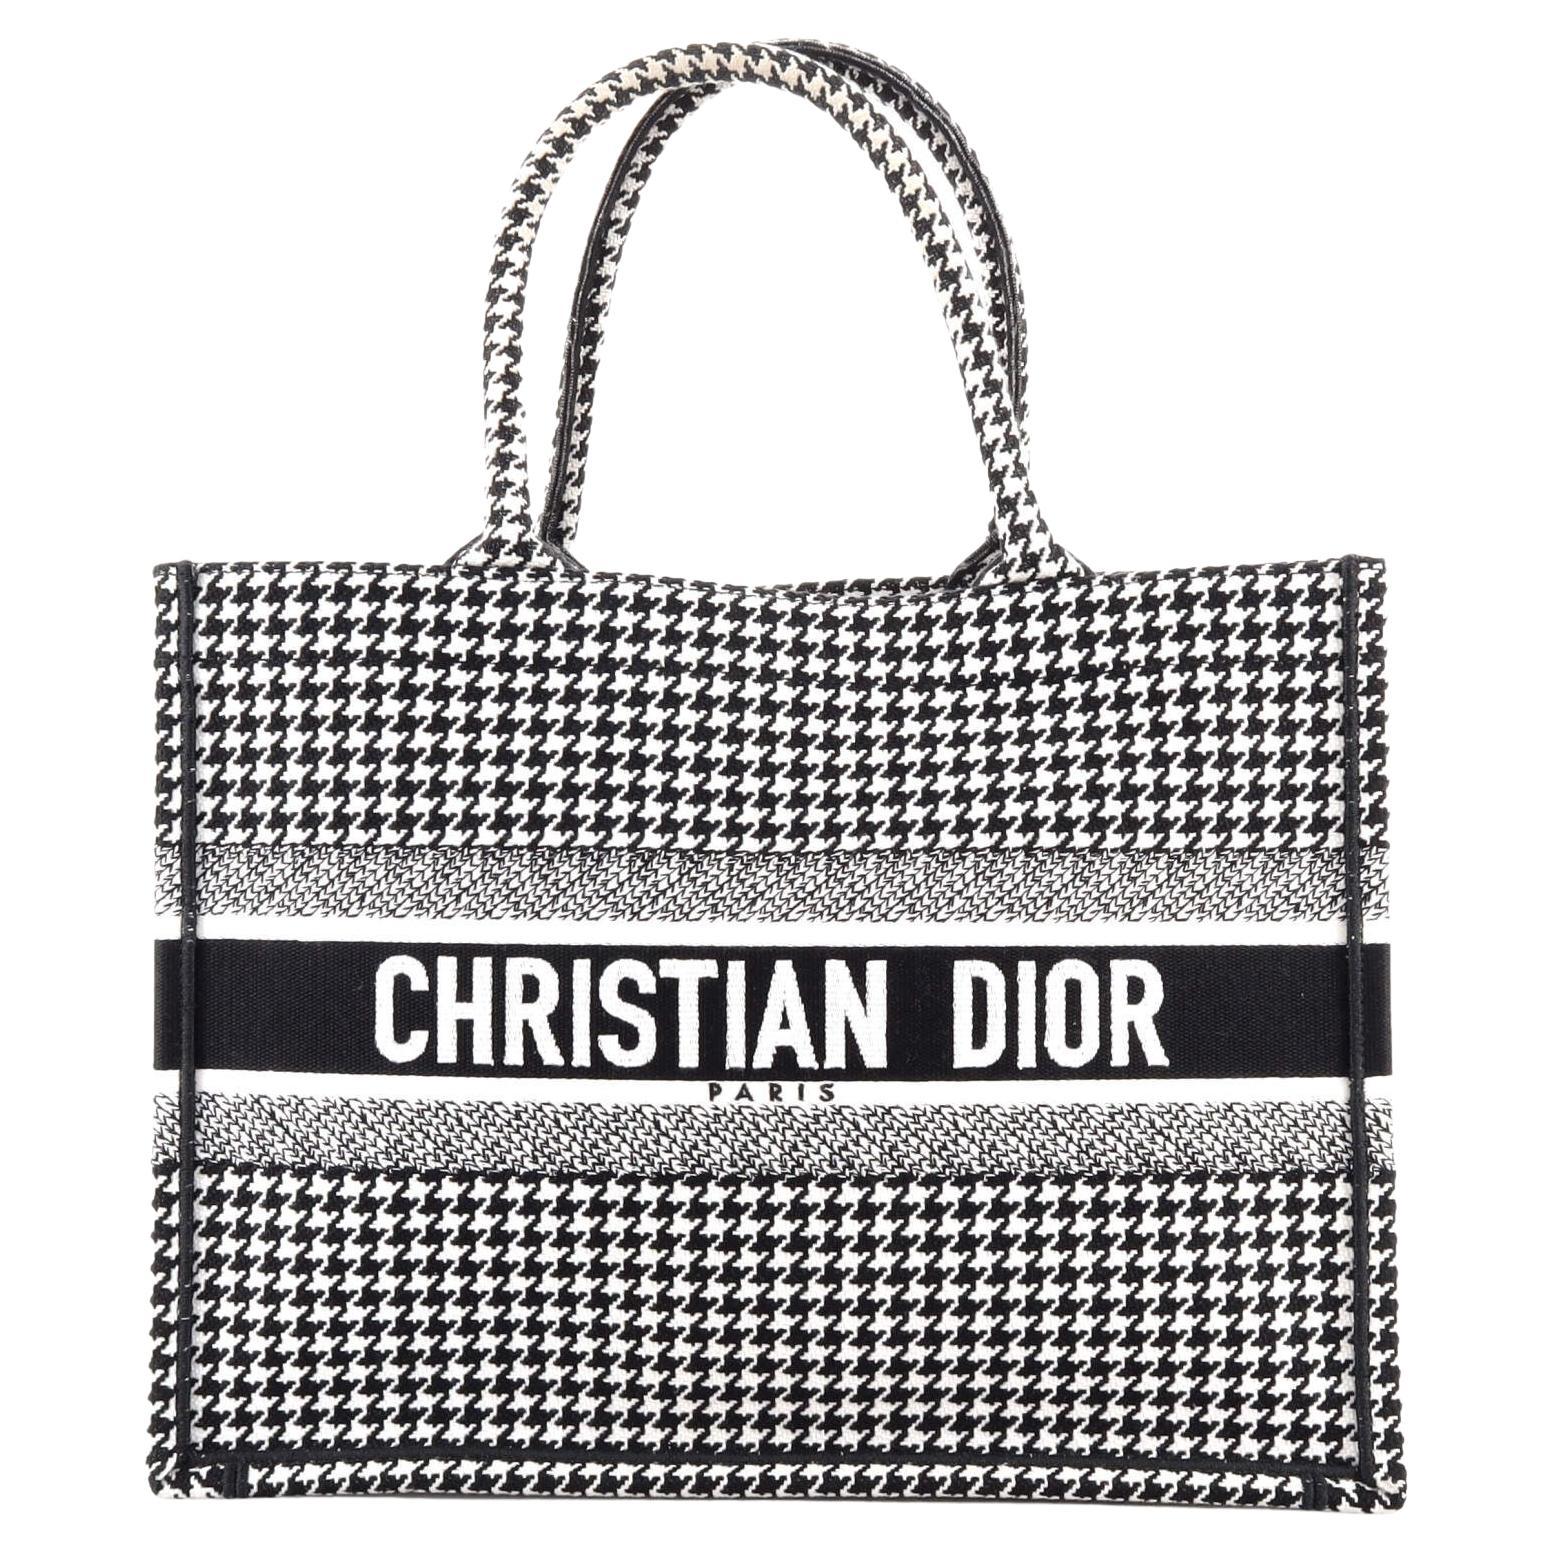 Christian Dior Book Tote Houndstooth Canvas Small